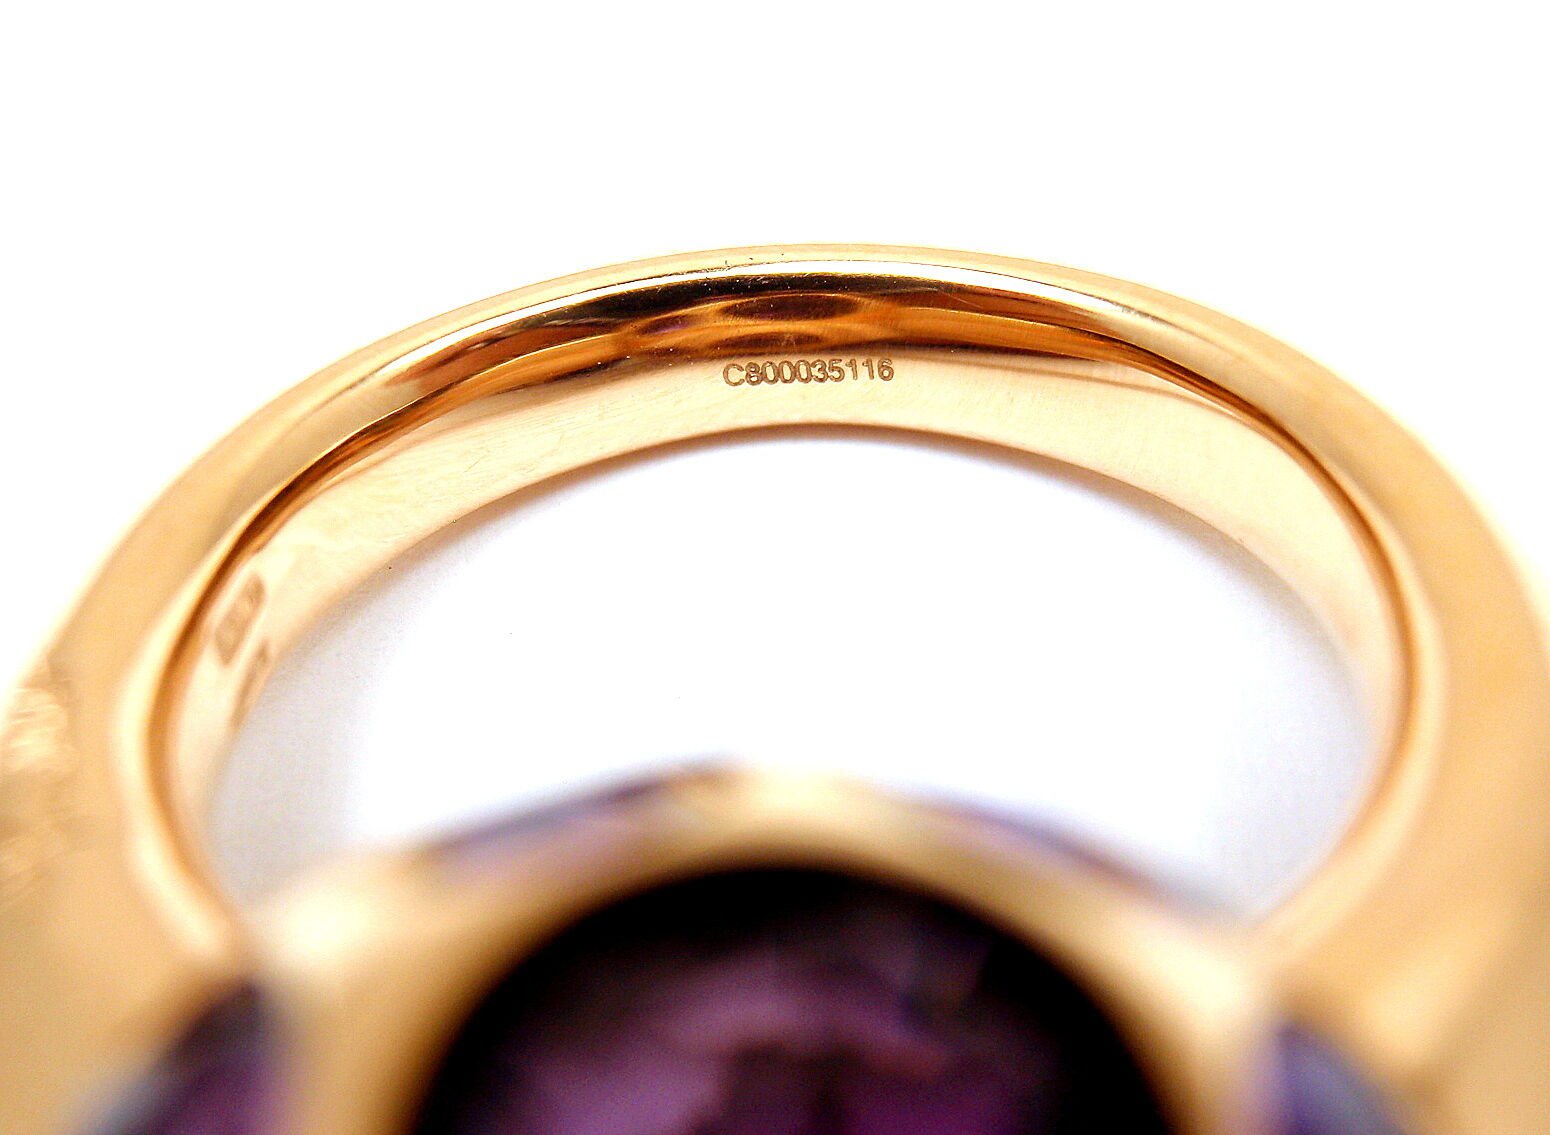 Pomellato Jewelry & Watches:Vintage & Antique Jewelry:Rings NEW! AUTHENTIC POMELLATO HAREM 18K YELLOW GOLD AMETHYST RING sz 4.5 with TAG